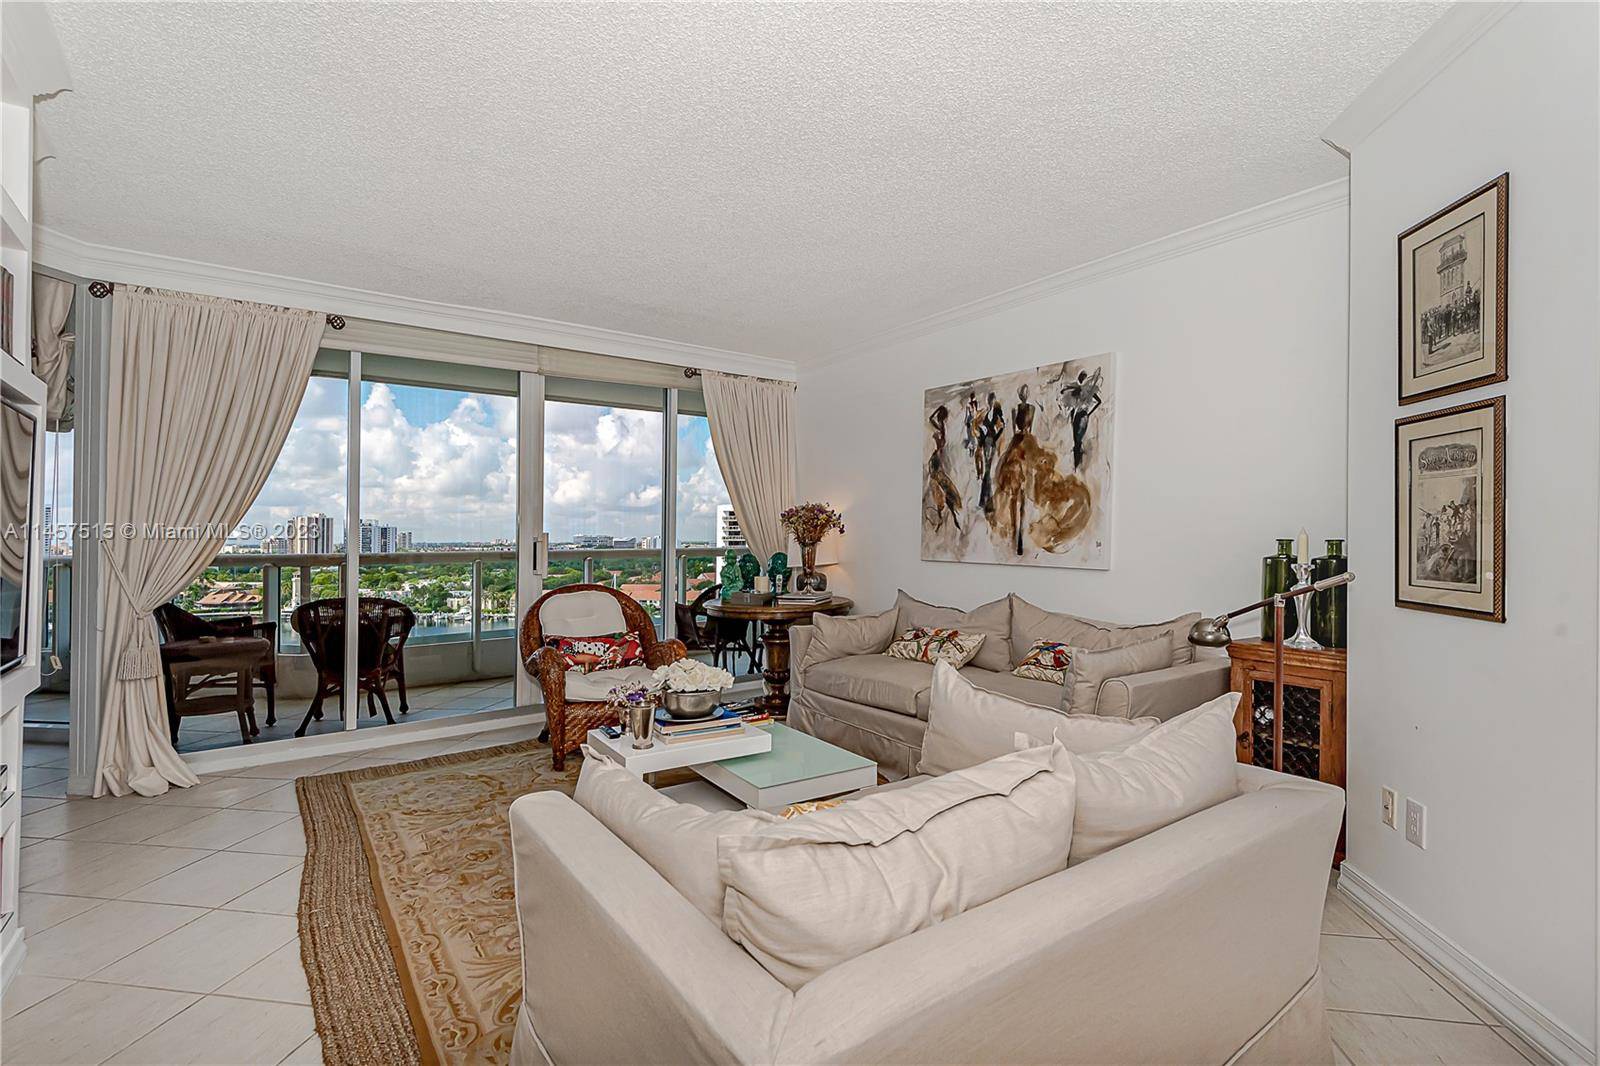 Luxurious 3 Bed 2 Bath Condo in the North Tower of the Fabulous Community of The Point.